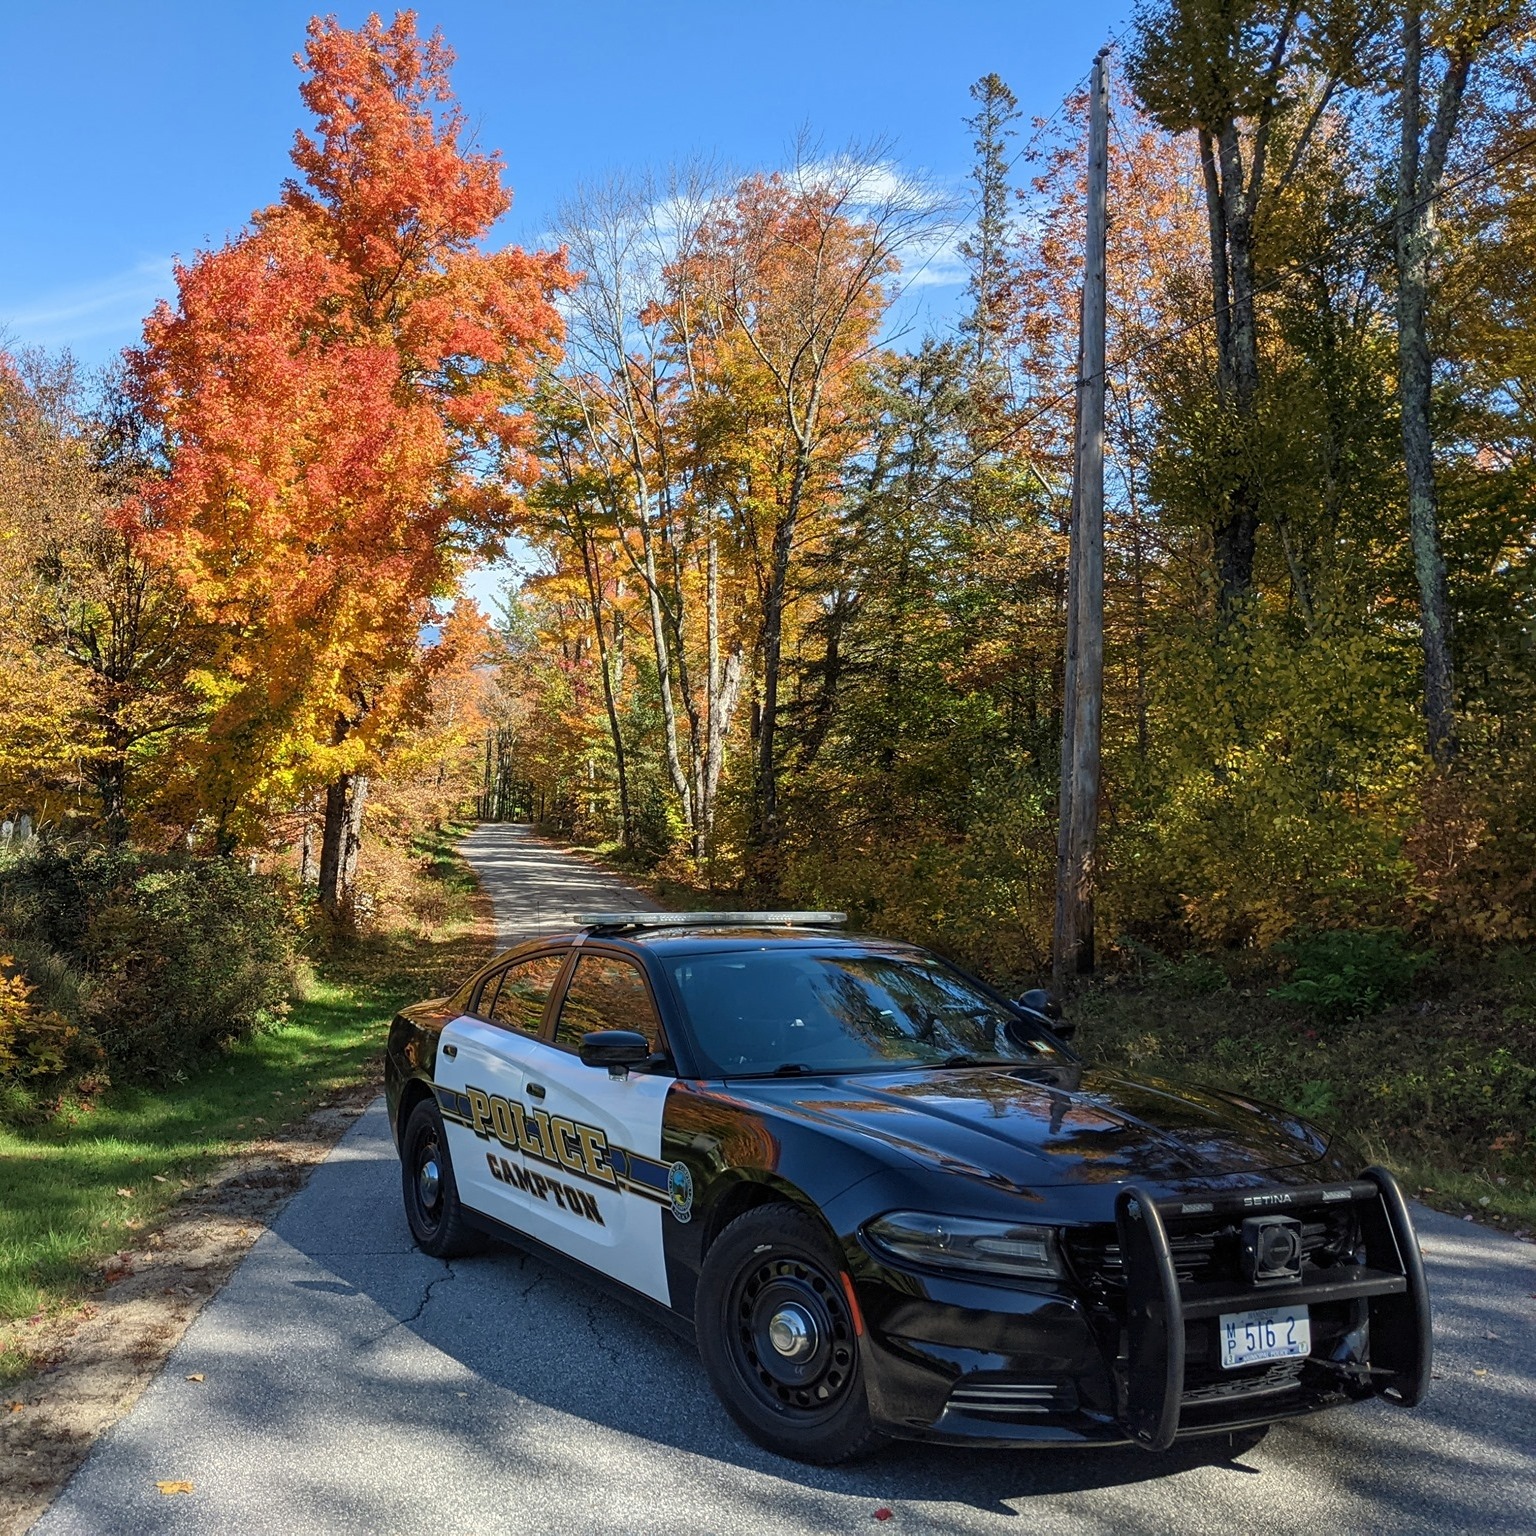 Campton Police Department, NH Police Jobs